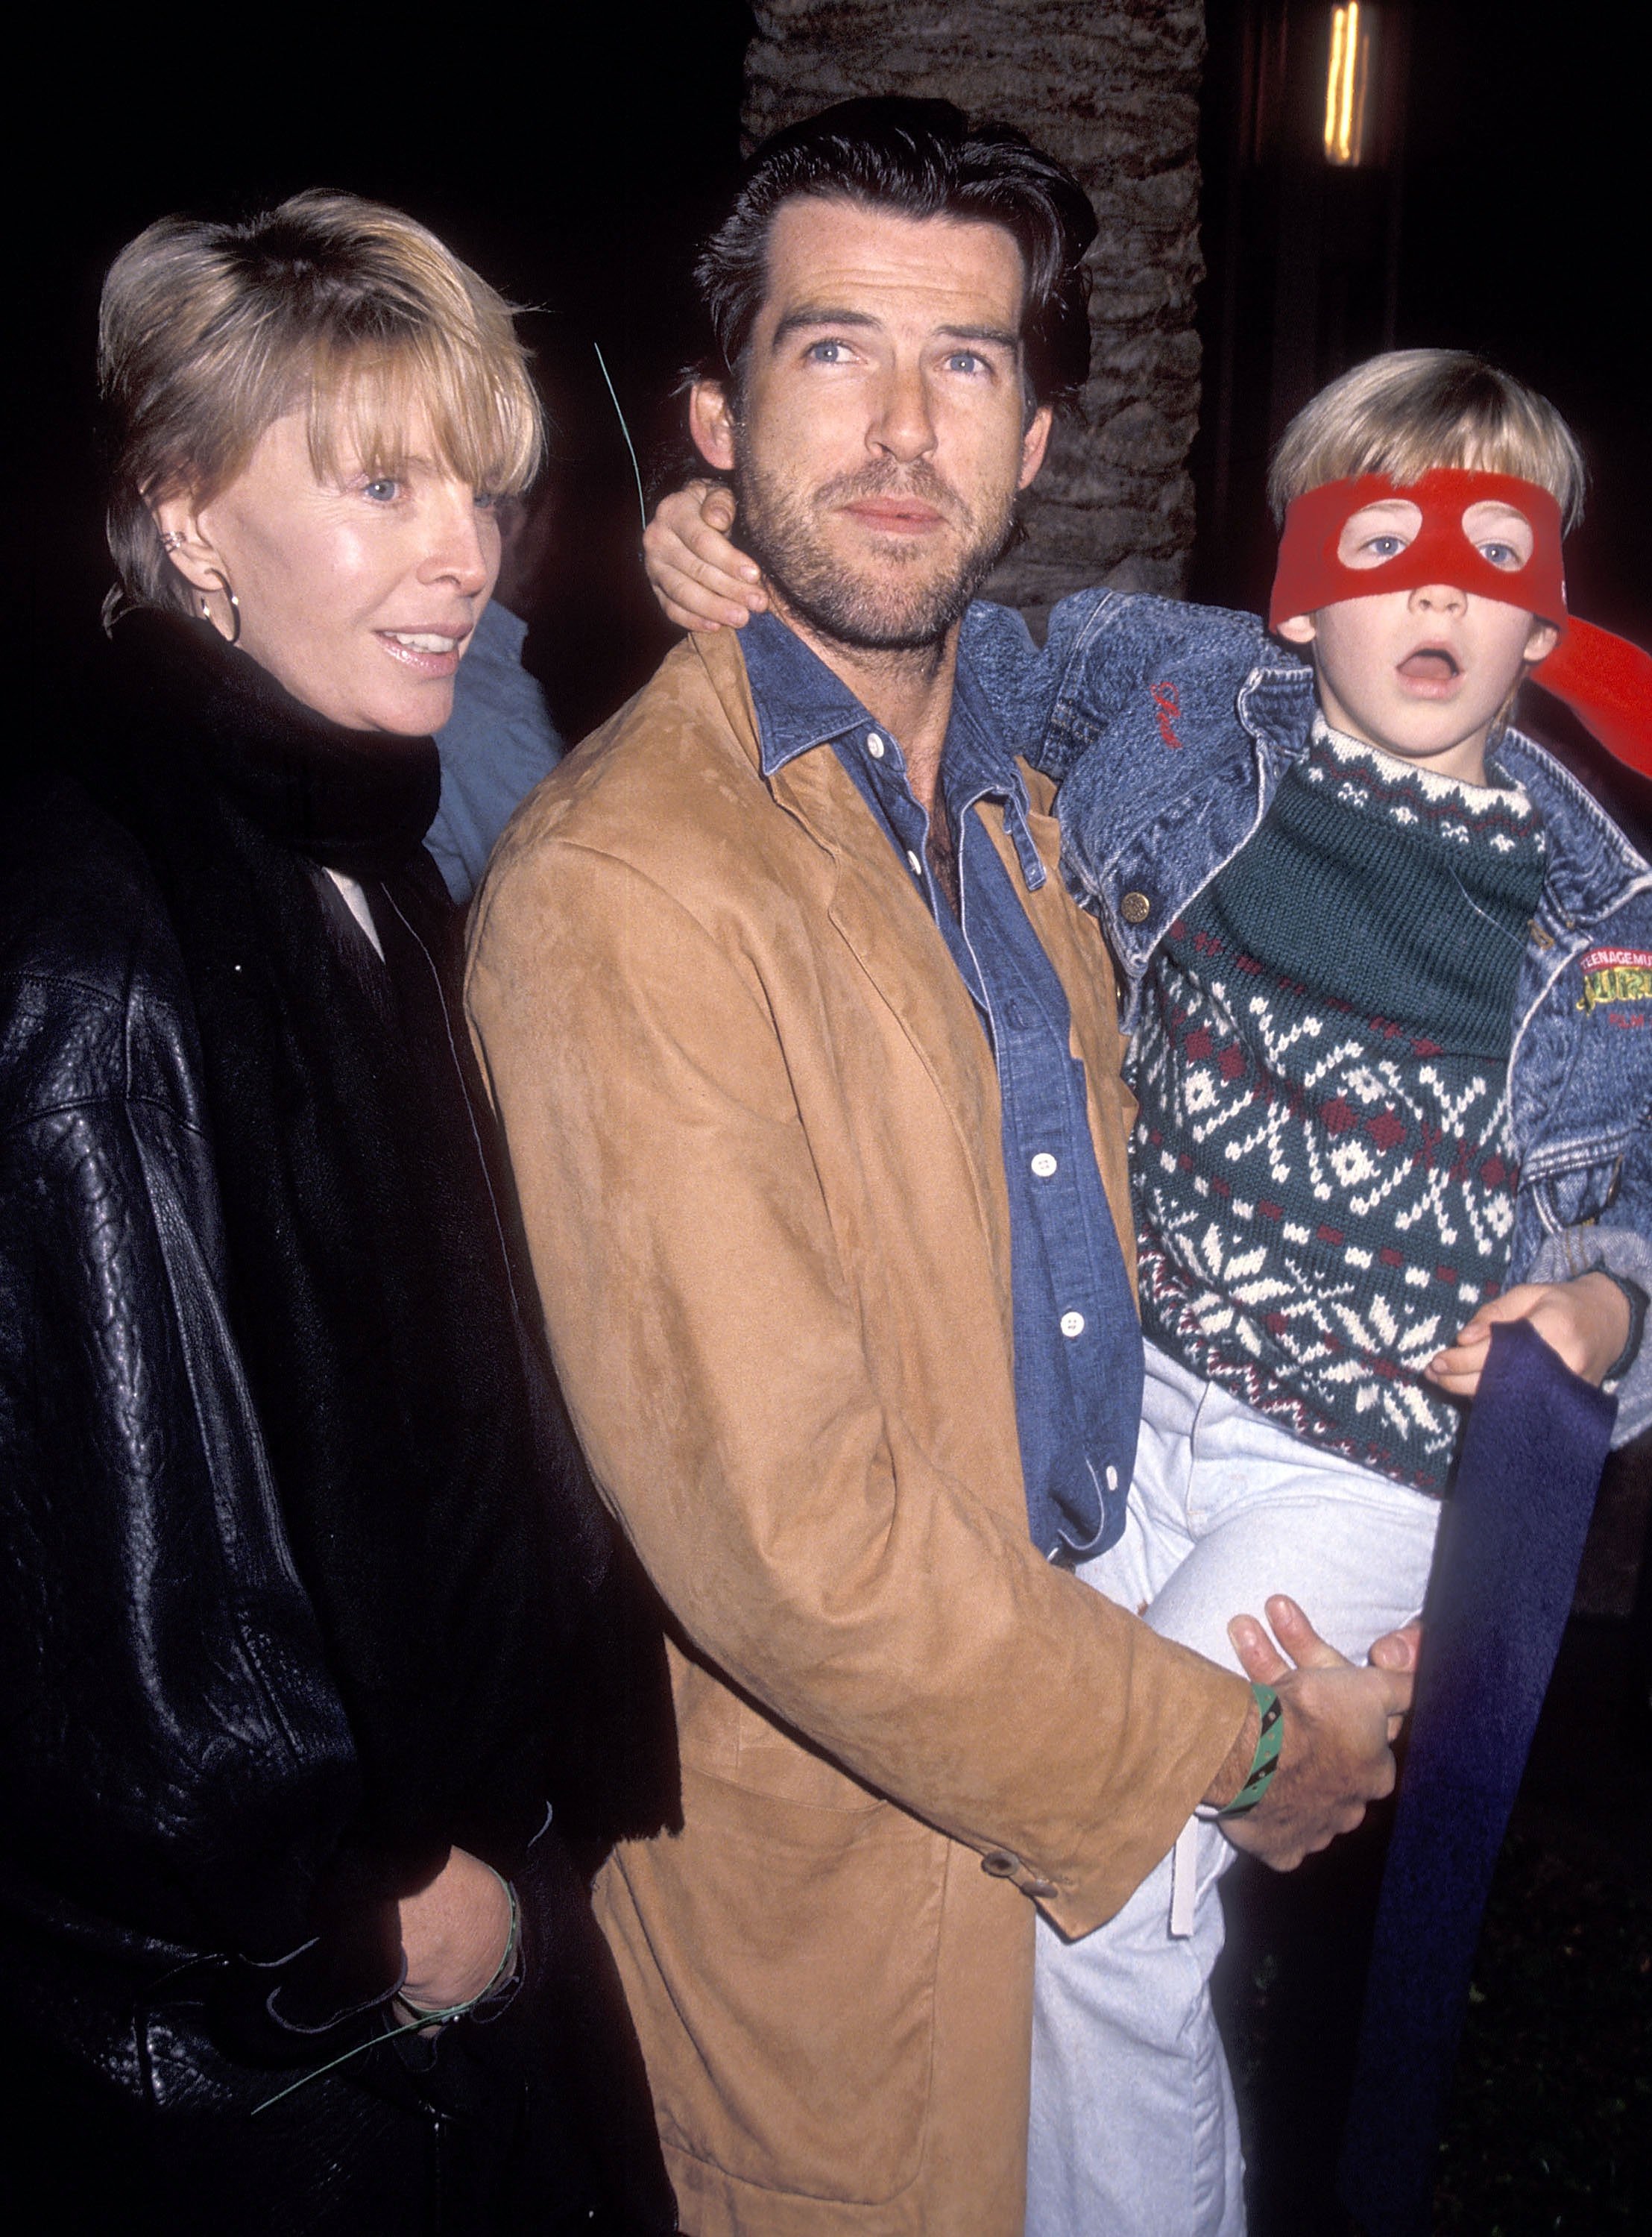 Actor Pierce Brosnan, wife Cassandra Harris and son Sean Brosnan attend the Pre-Show Backstage Pizza Party for the Teenage Mutant Ninja Turtle's "Coming Out of Their Shells" Rock & Roll Tour on November 21, 1990 at the Universal Amphitheatre in Universal City, California. | Source: Getty Images